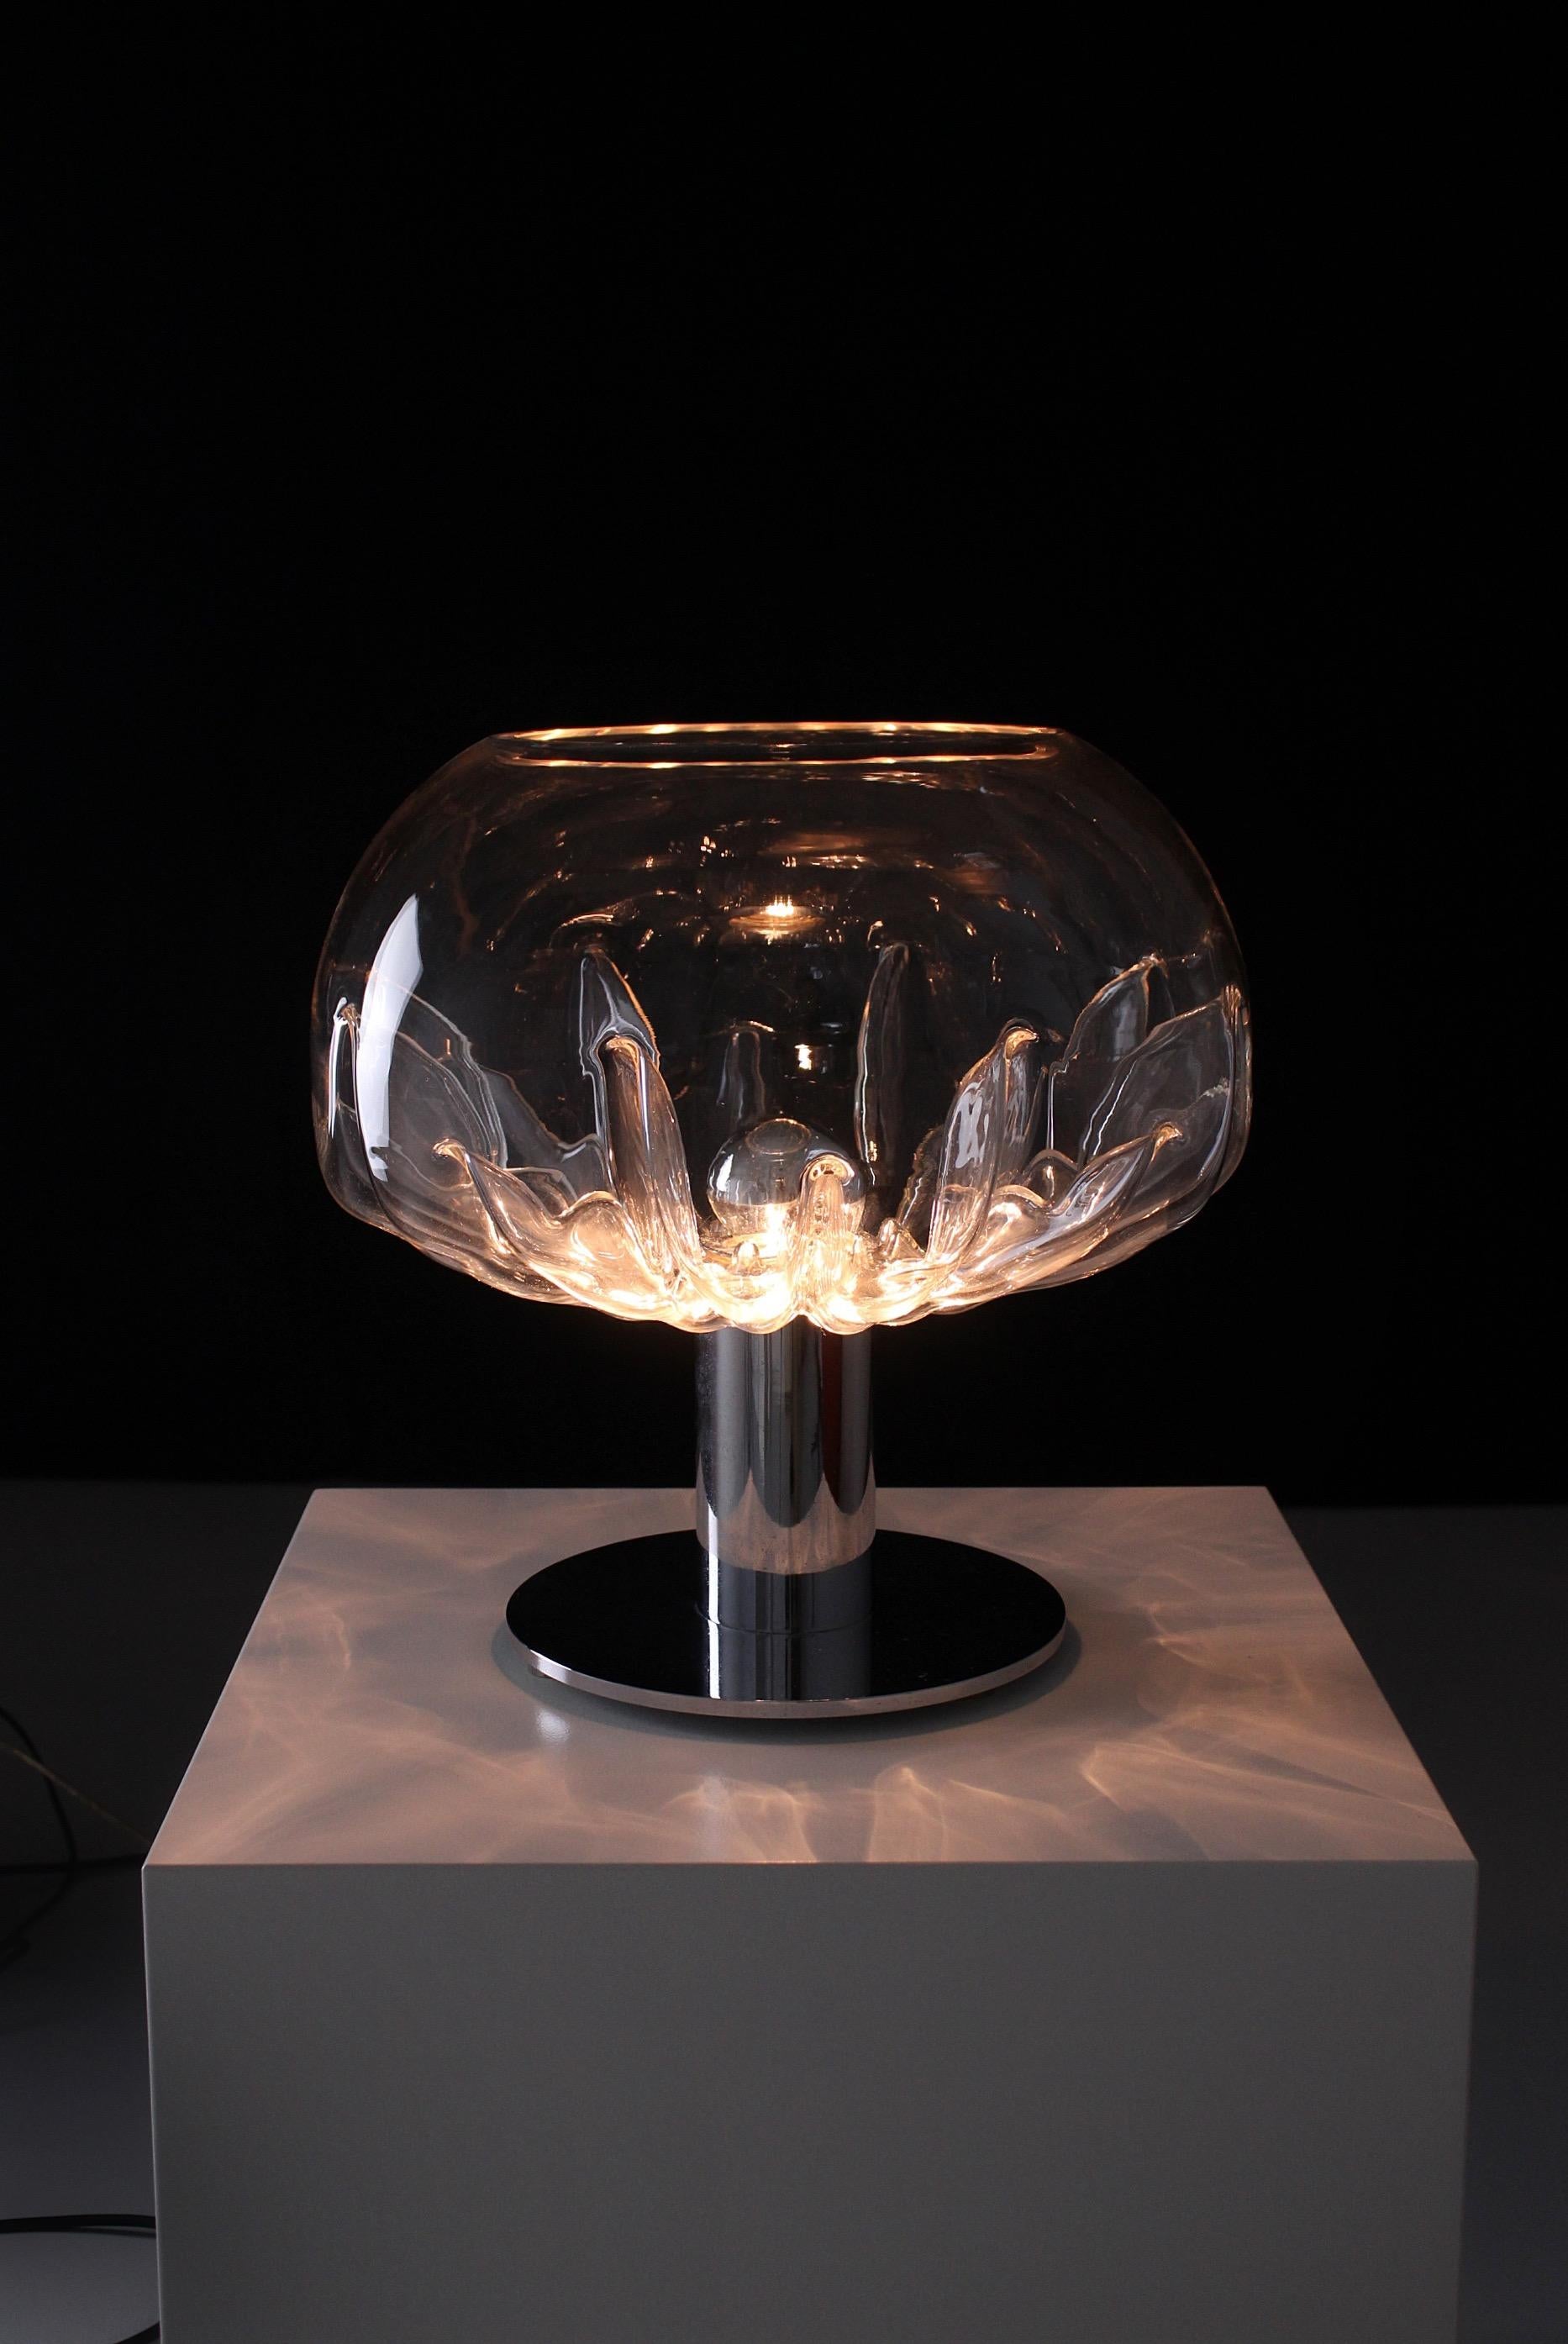 Rare Zinia table lamp designed by Toni Zuccheri in 1973. Produced by the glass factory VeArt in Scorze, Italy. This distinctive lamp features a multitude of indentations, ranging from the outer periphery towards the core of the glass structure,